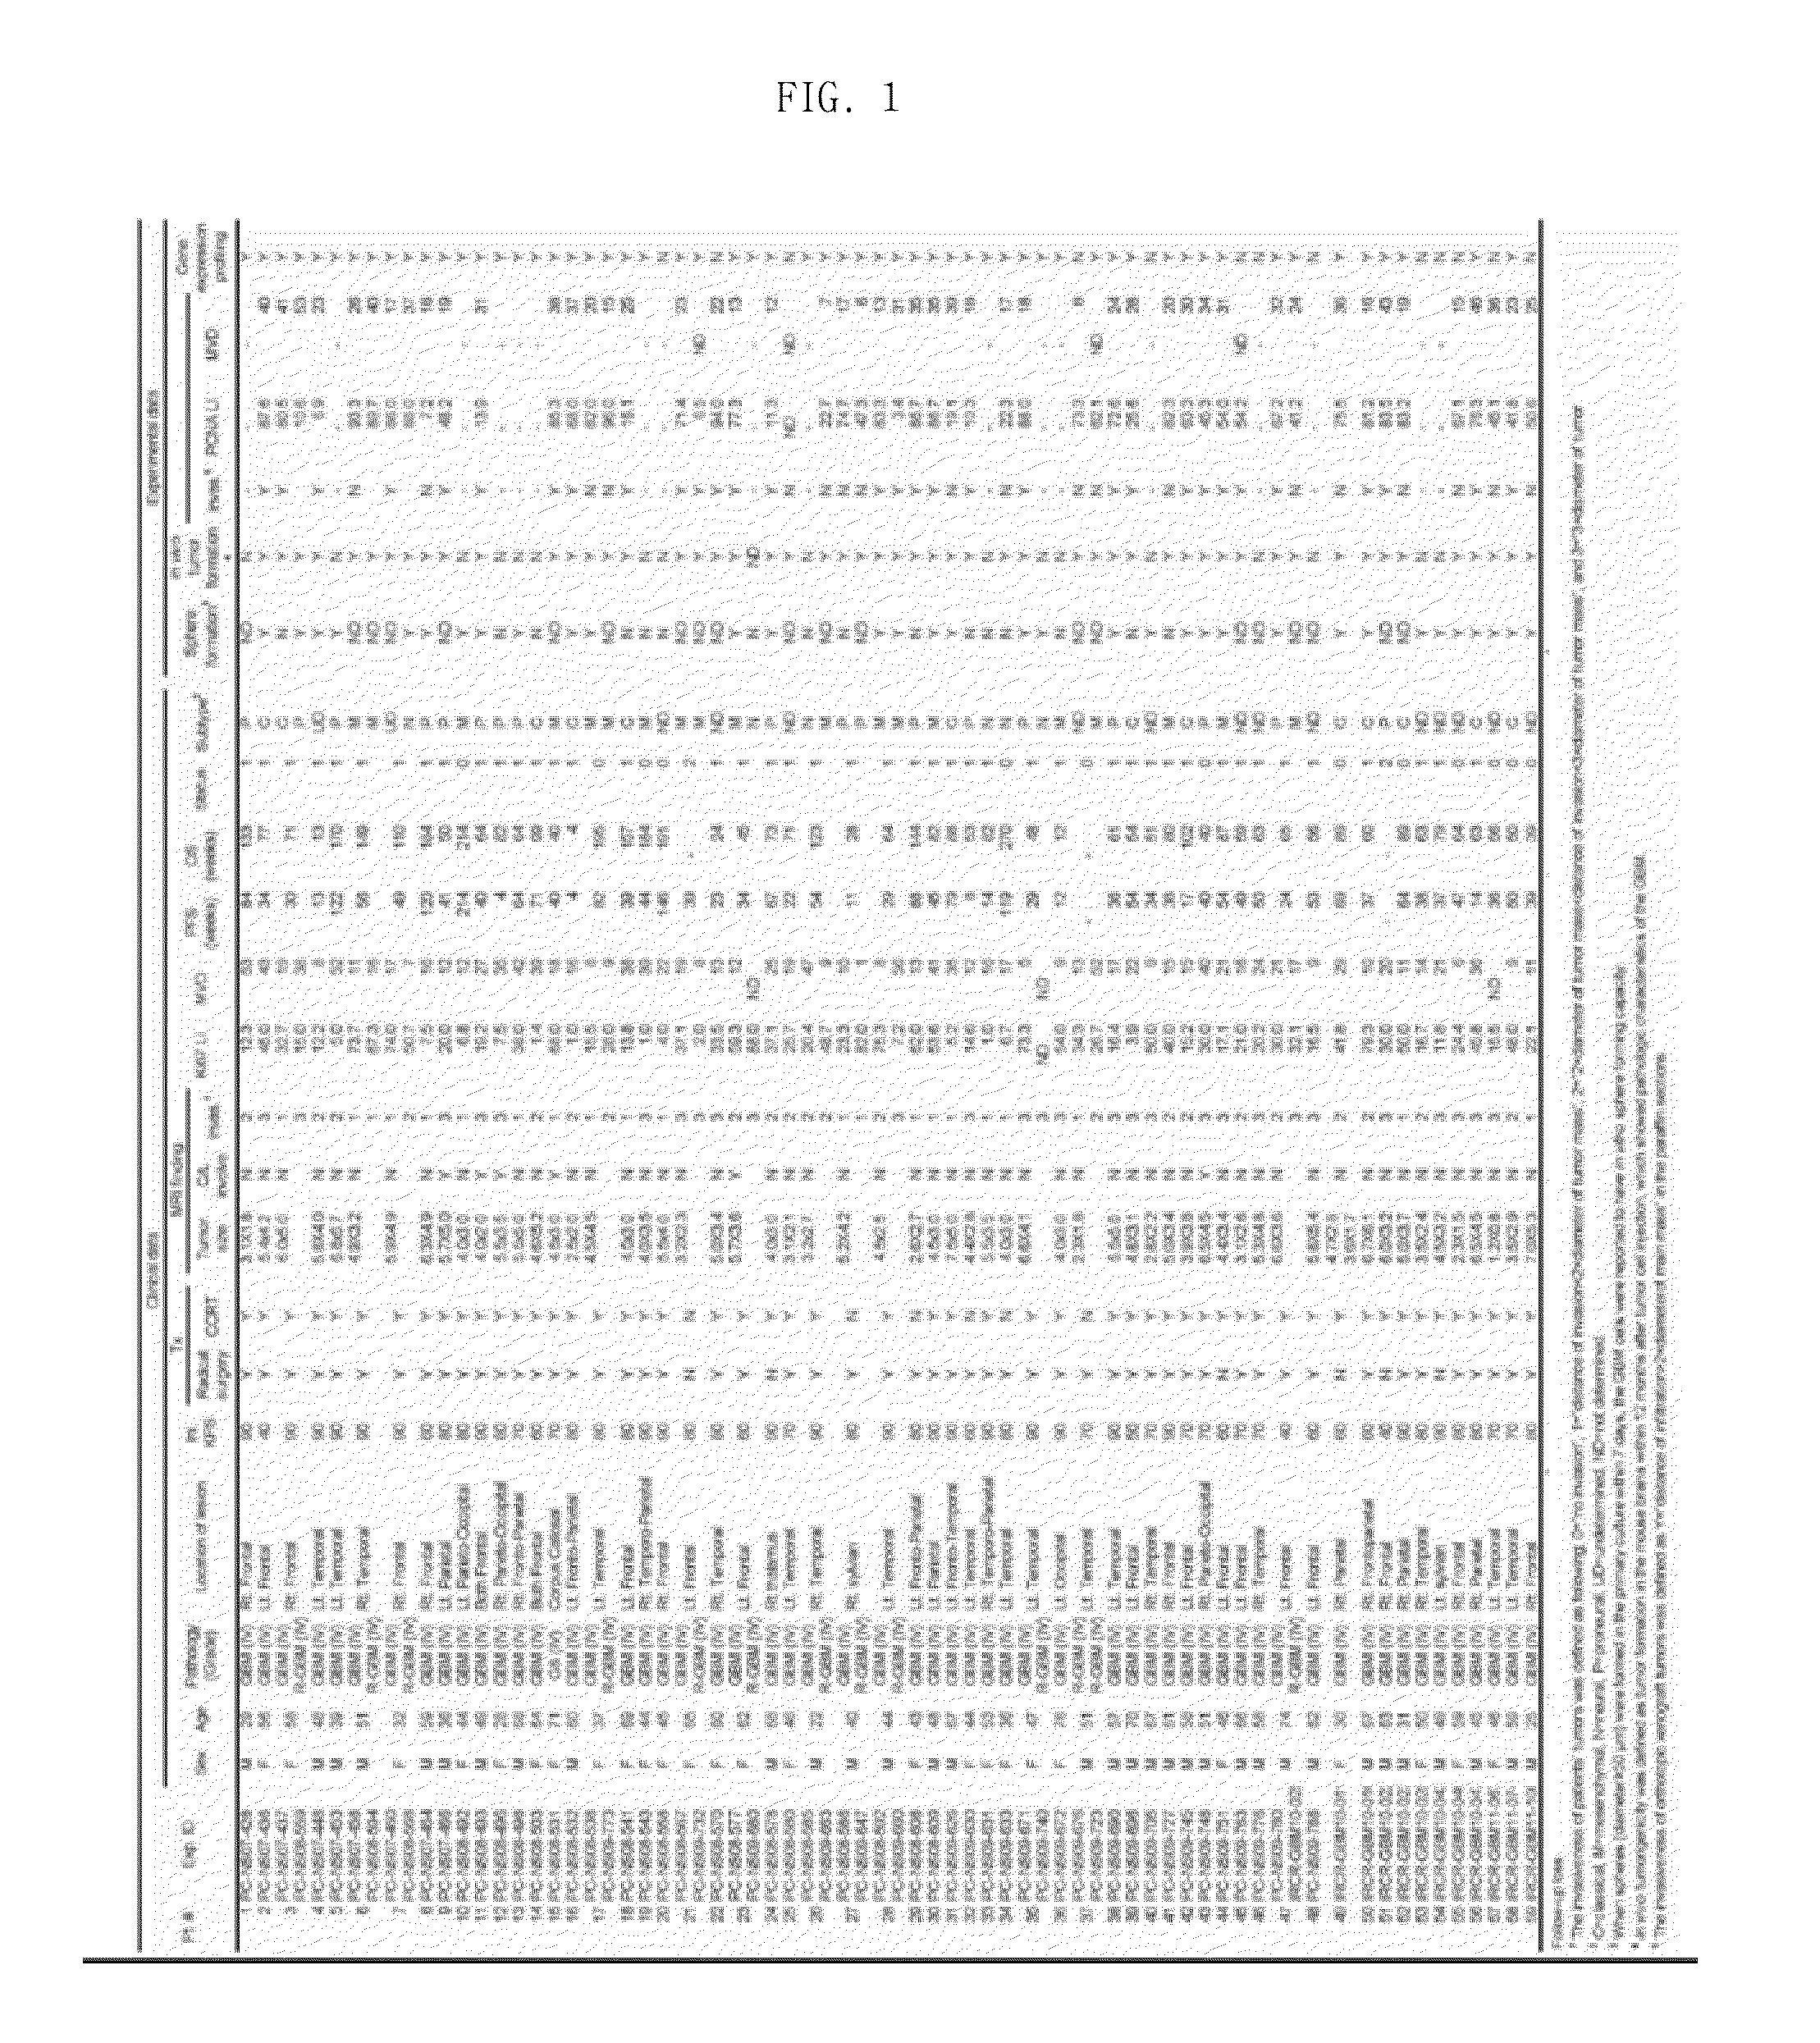 Method for preparing patient-specific glioblastoma animal model, and uses thereof